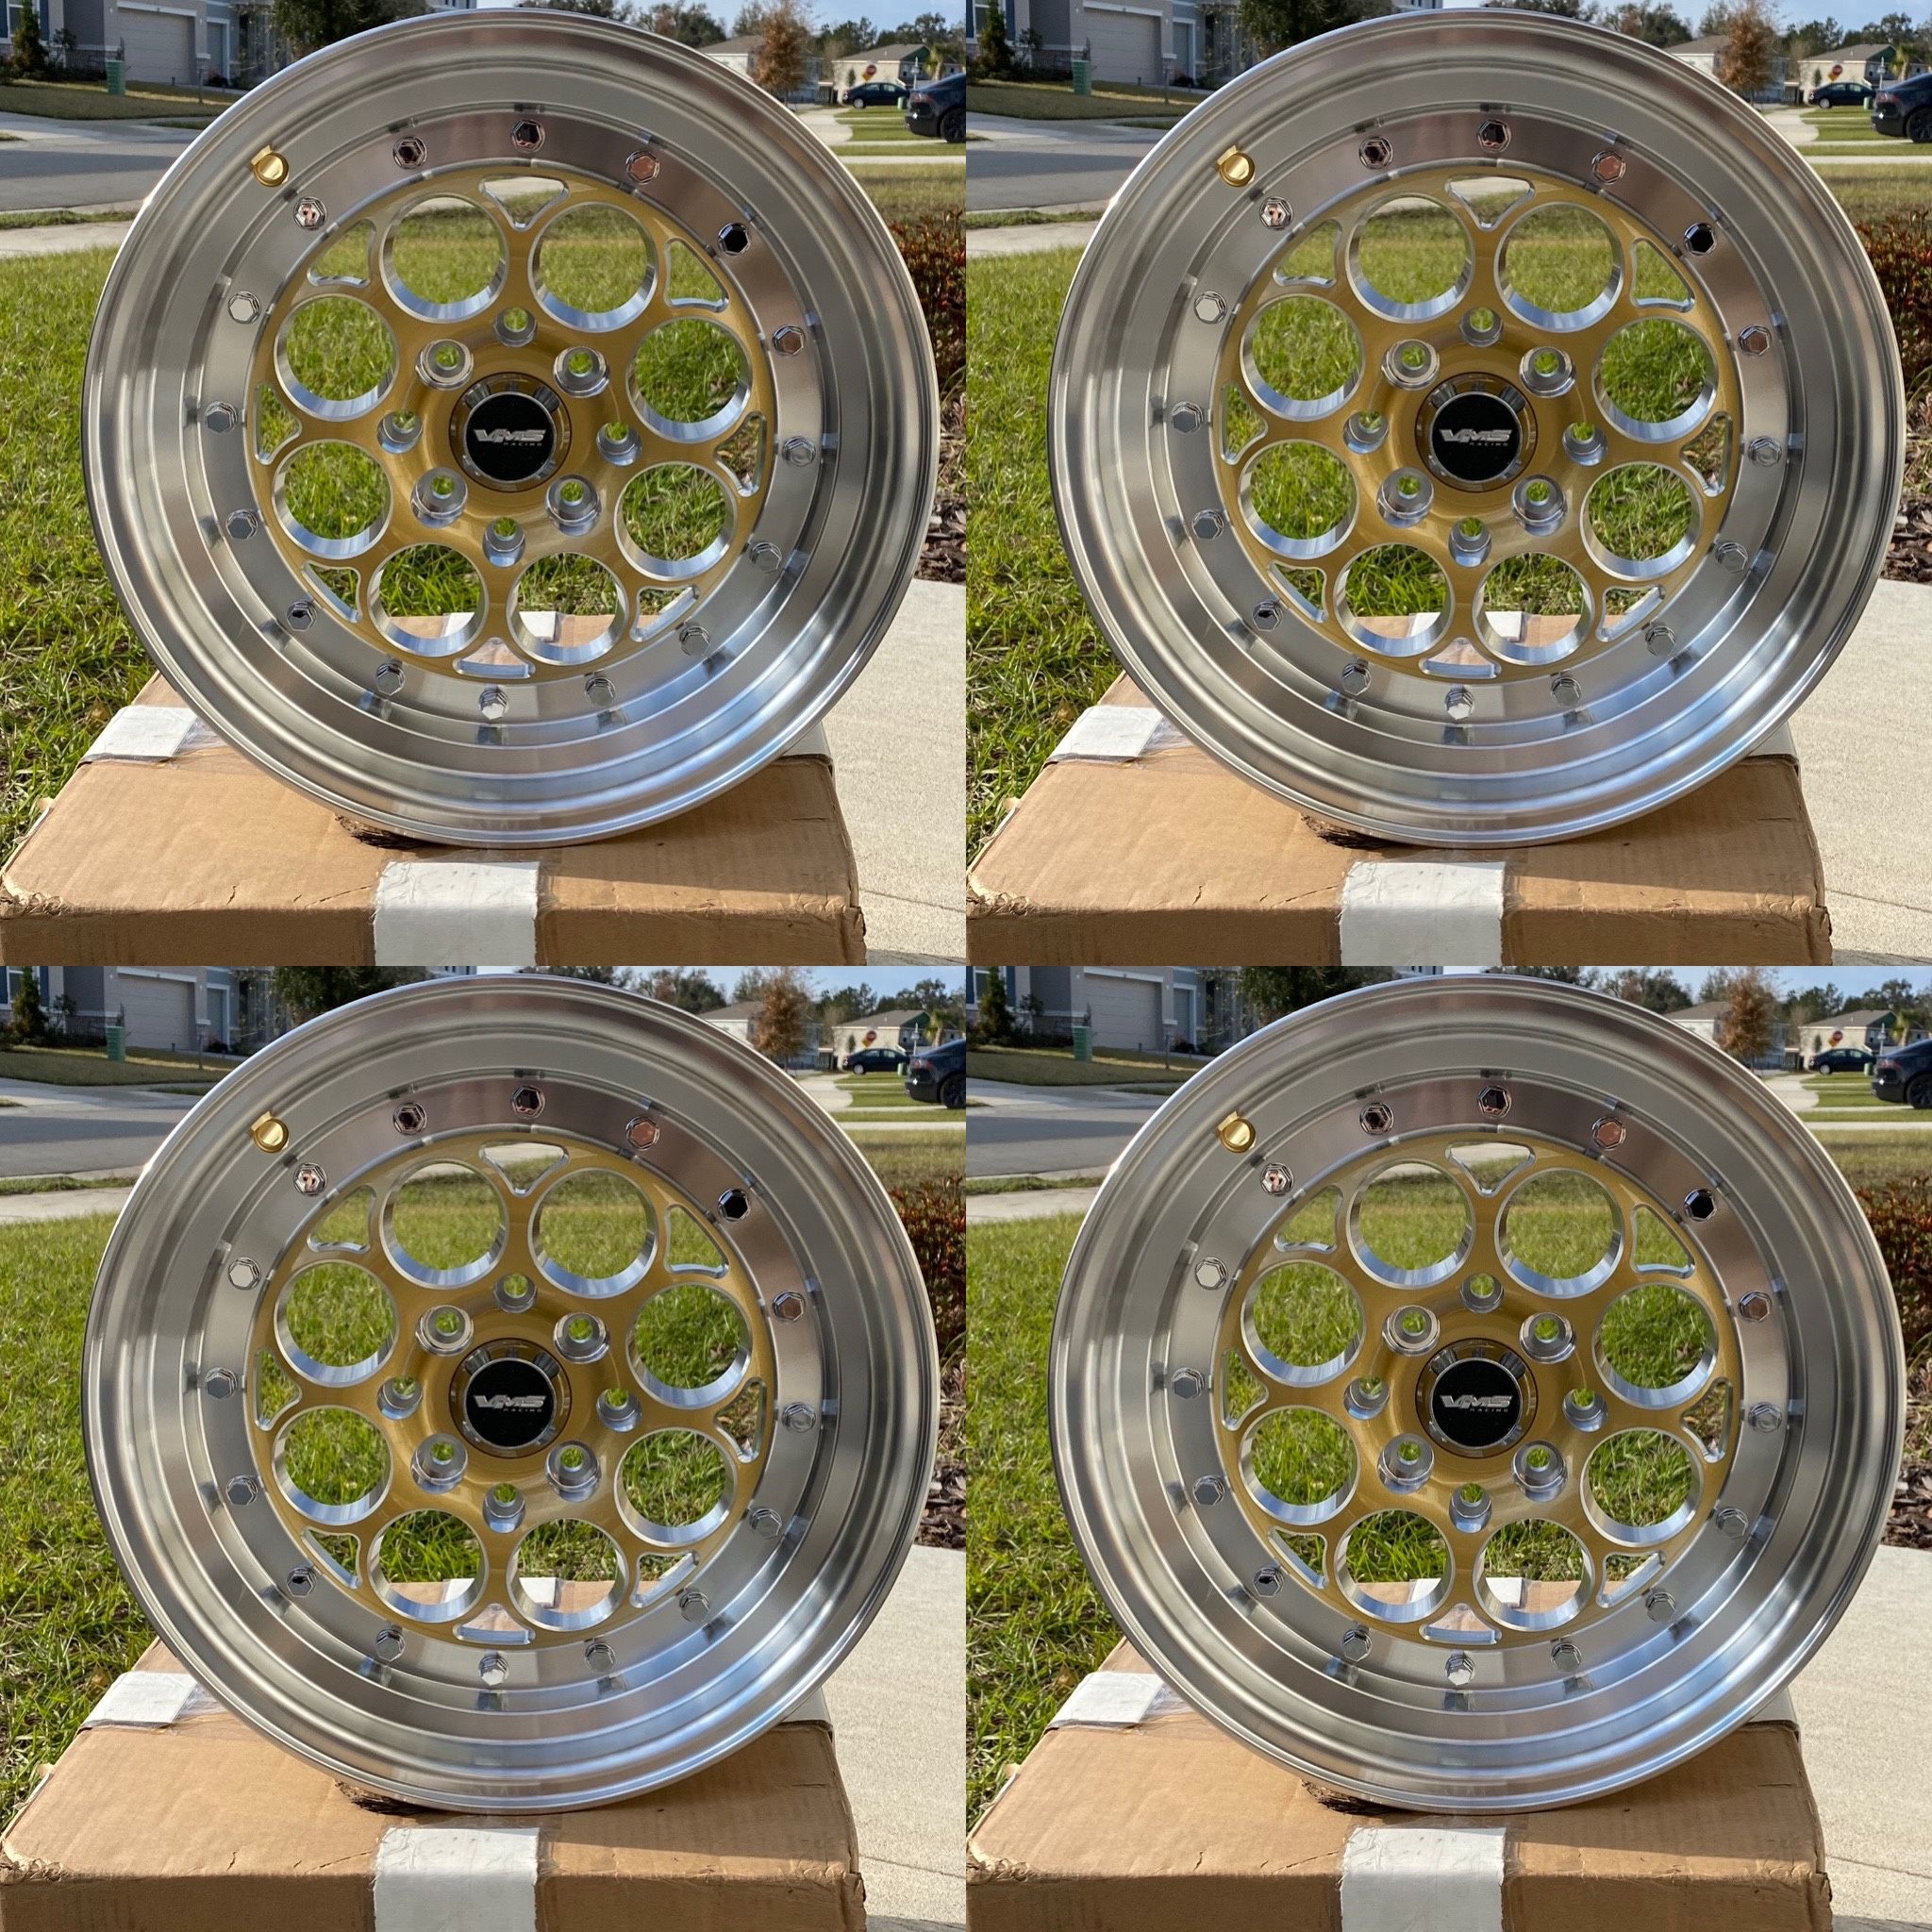 15x8 VMS RACING WHEELS 4x100 GOLD AND POLISHED 4x114.3 OFFSET 20